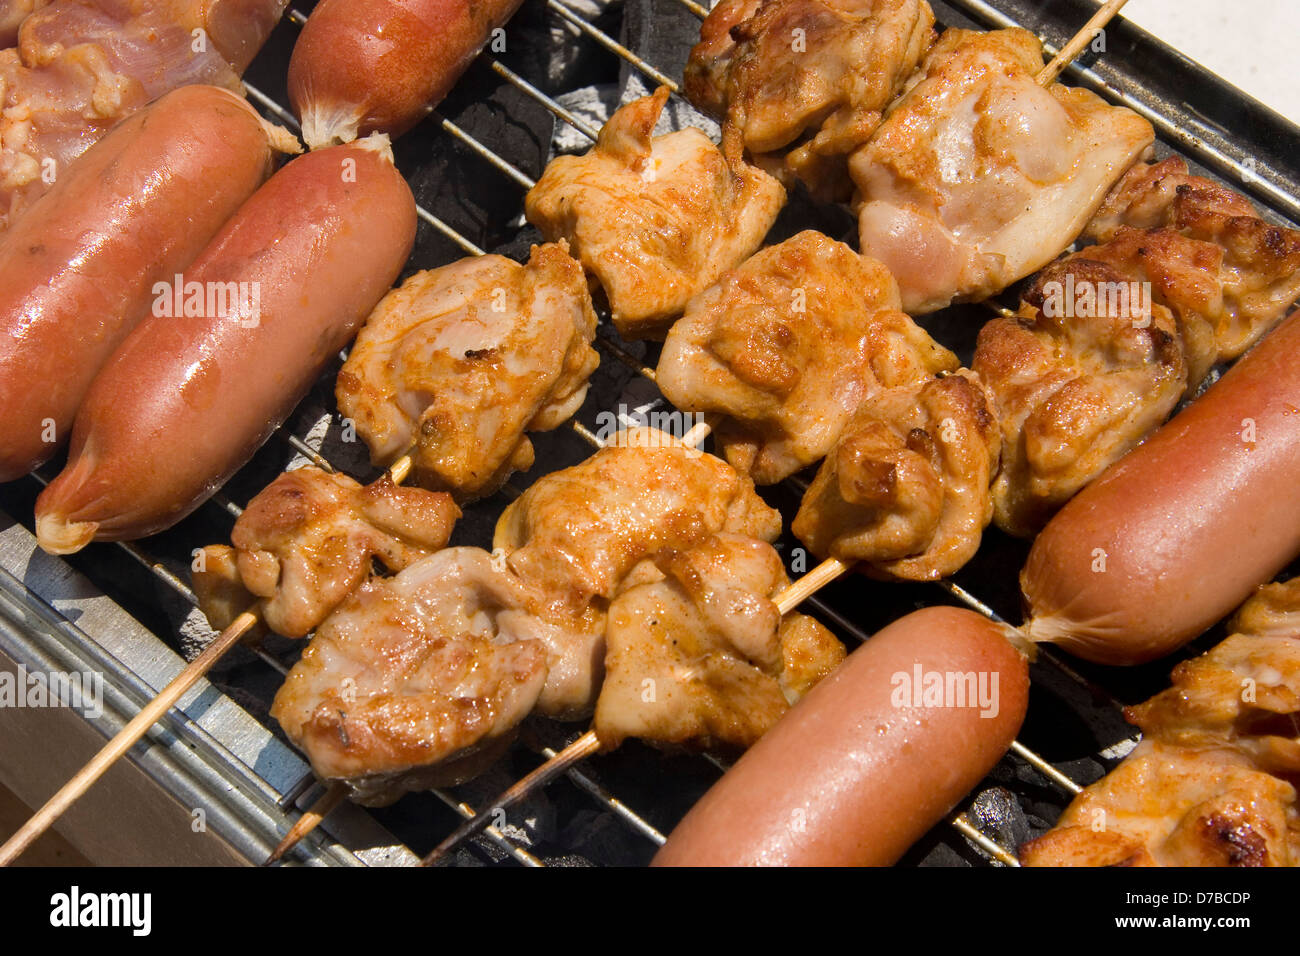 Bar-B-Que (Barbeque) of chicken shashlik and sausages Stock Photo